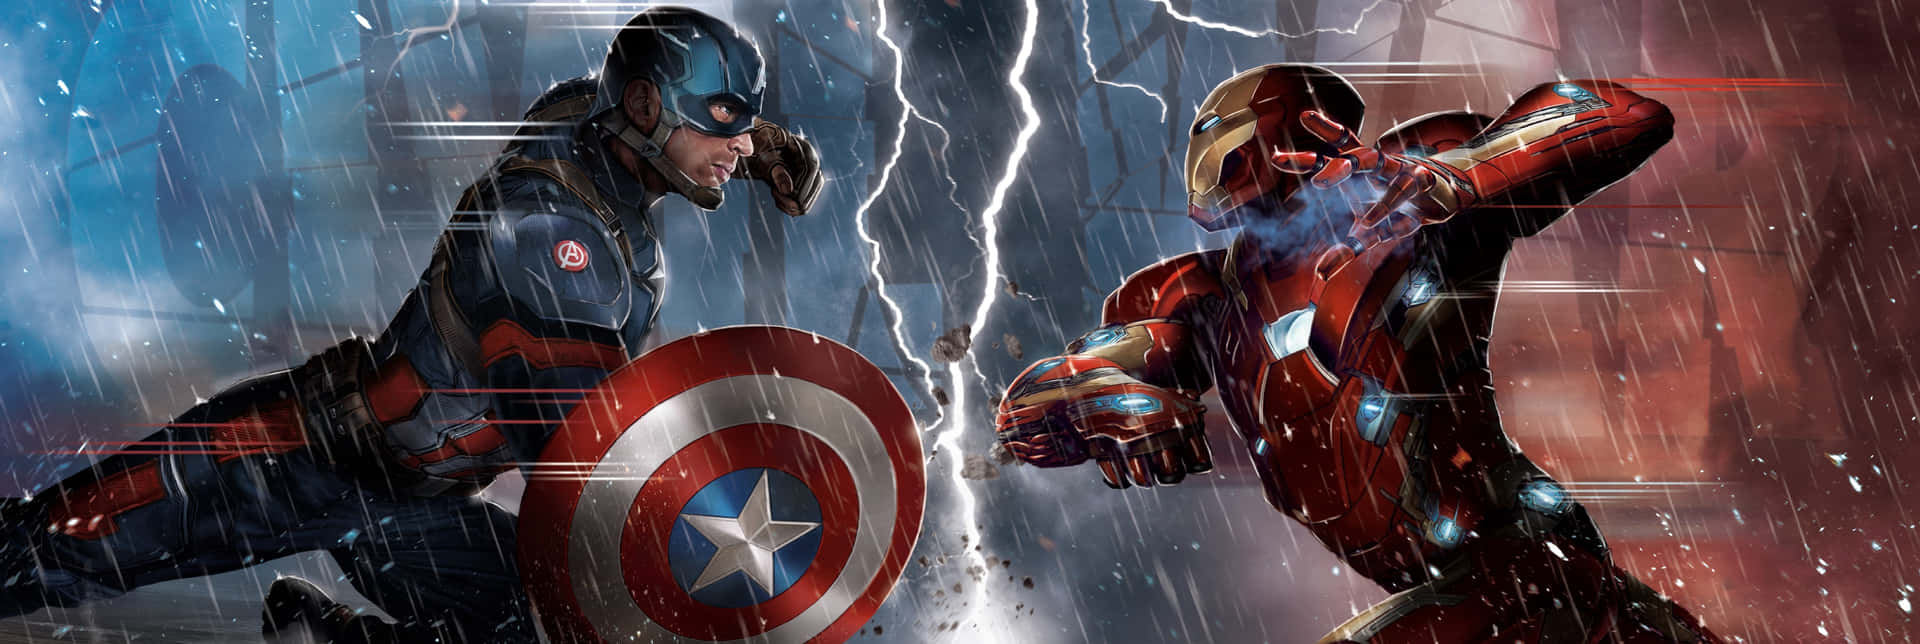 Bring on the action with Captain America dual screen Wallpaper